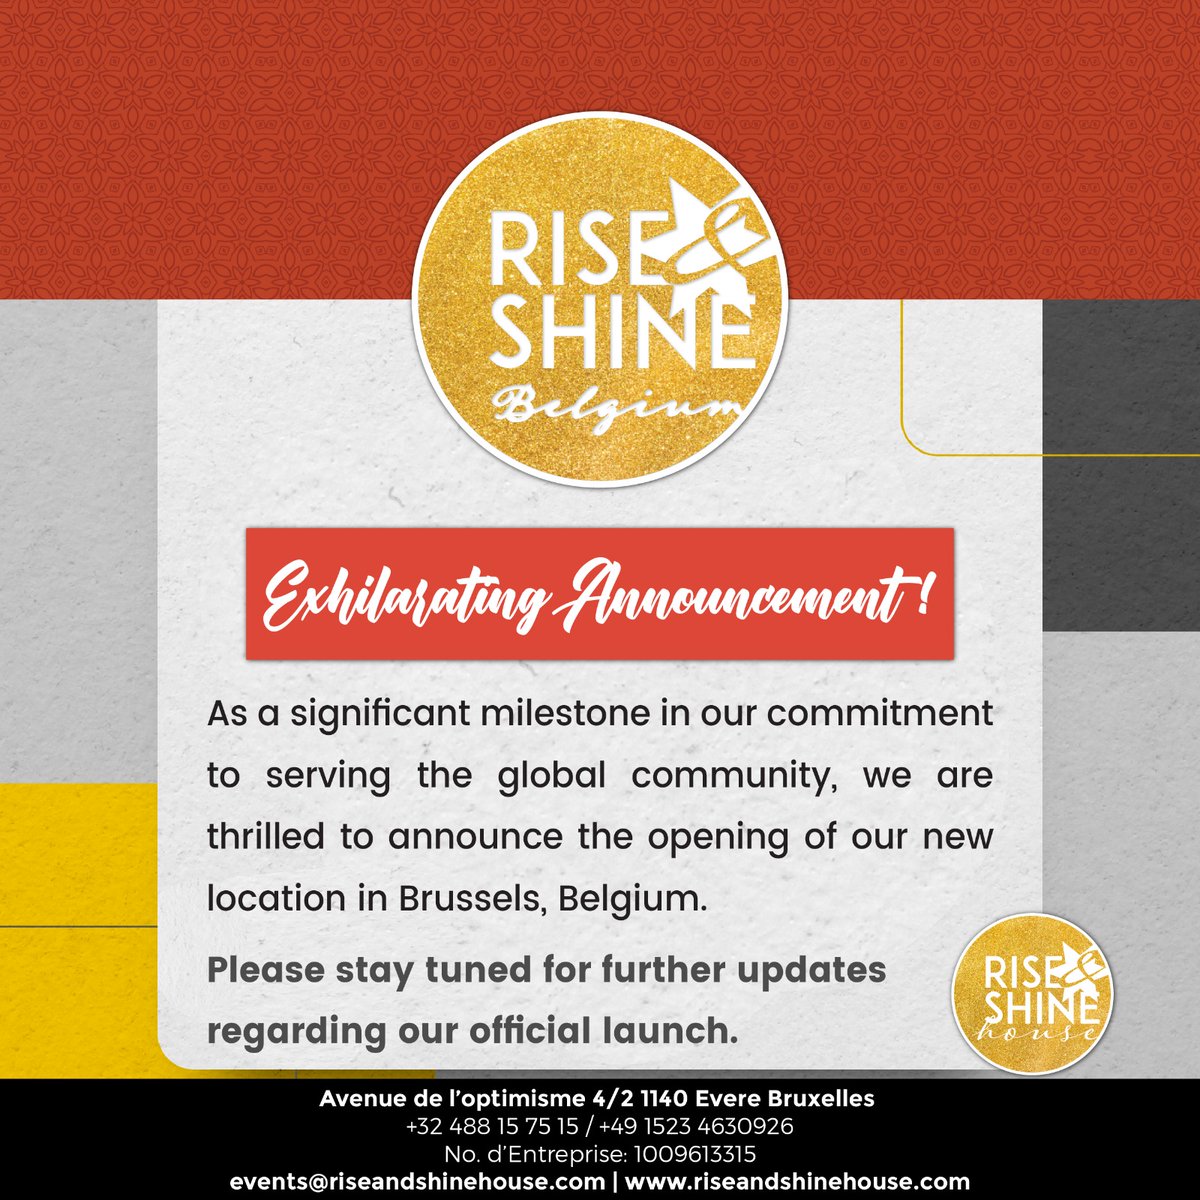 📢 EXCITING NEWS! 👏🇧🇪 As a significant milestone in our commitment to serving the global community, we are thrilled to announce the opening of our new location in Brussels, Belgium. Stay tuned for further updates regarding our official launch. #RiseWithUs #RiseandShineBelgium